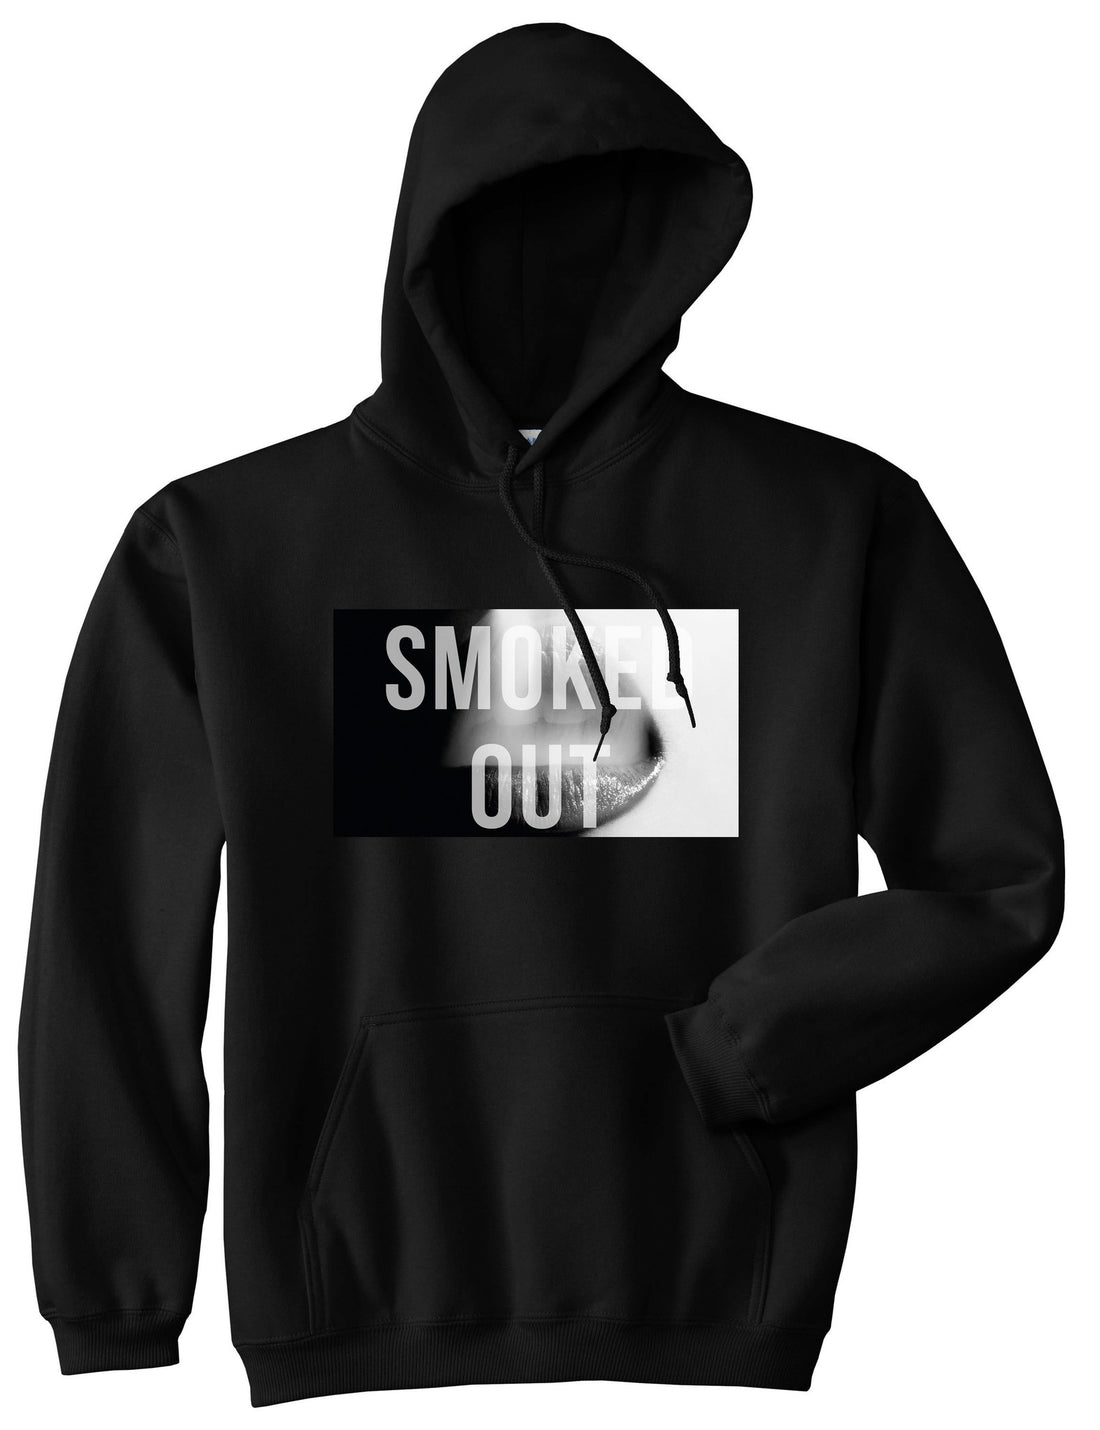 Smoked Out Weed Marijuana Girls Pot New York Boys Kids Pullover Hoodie Hoody In Black by Kings Of NY